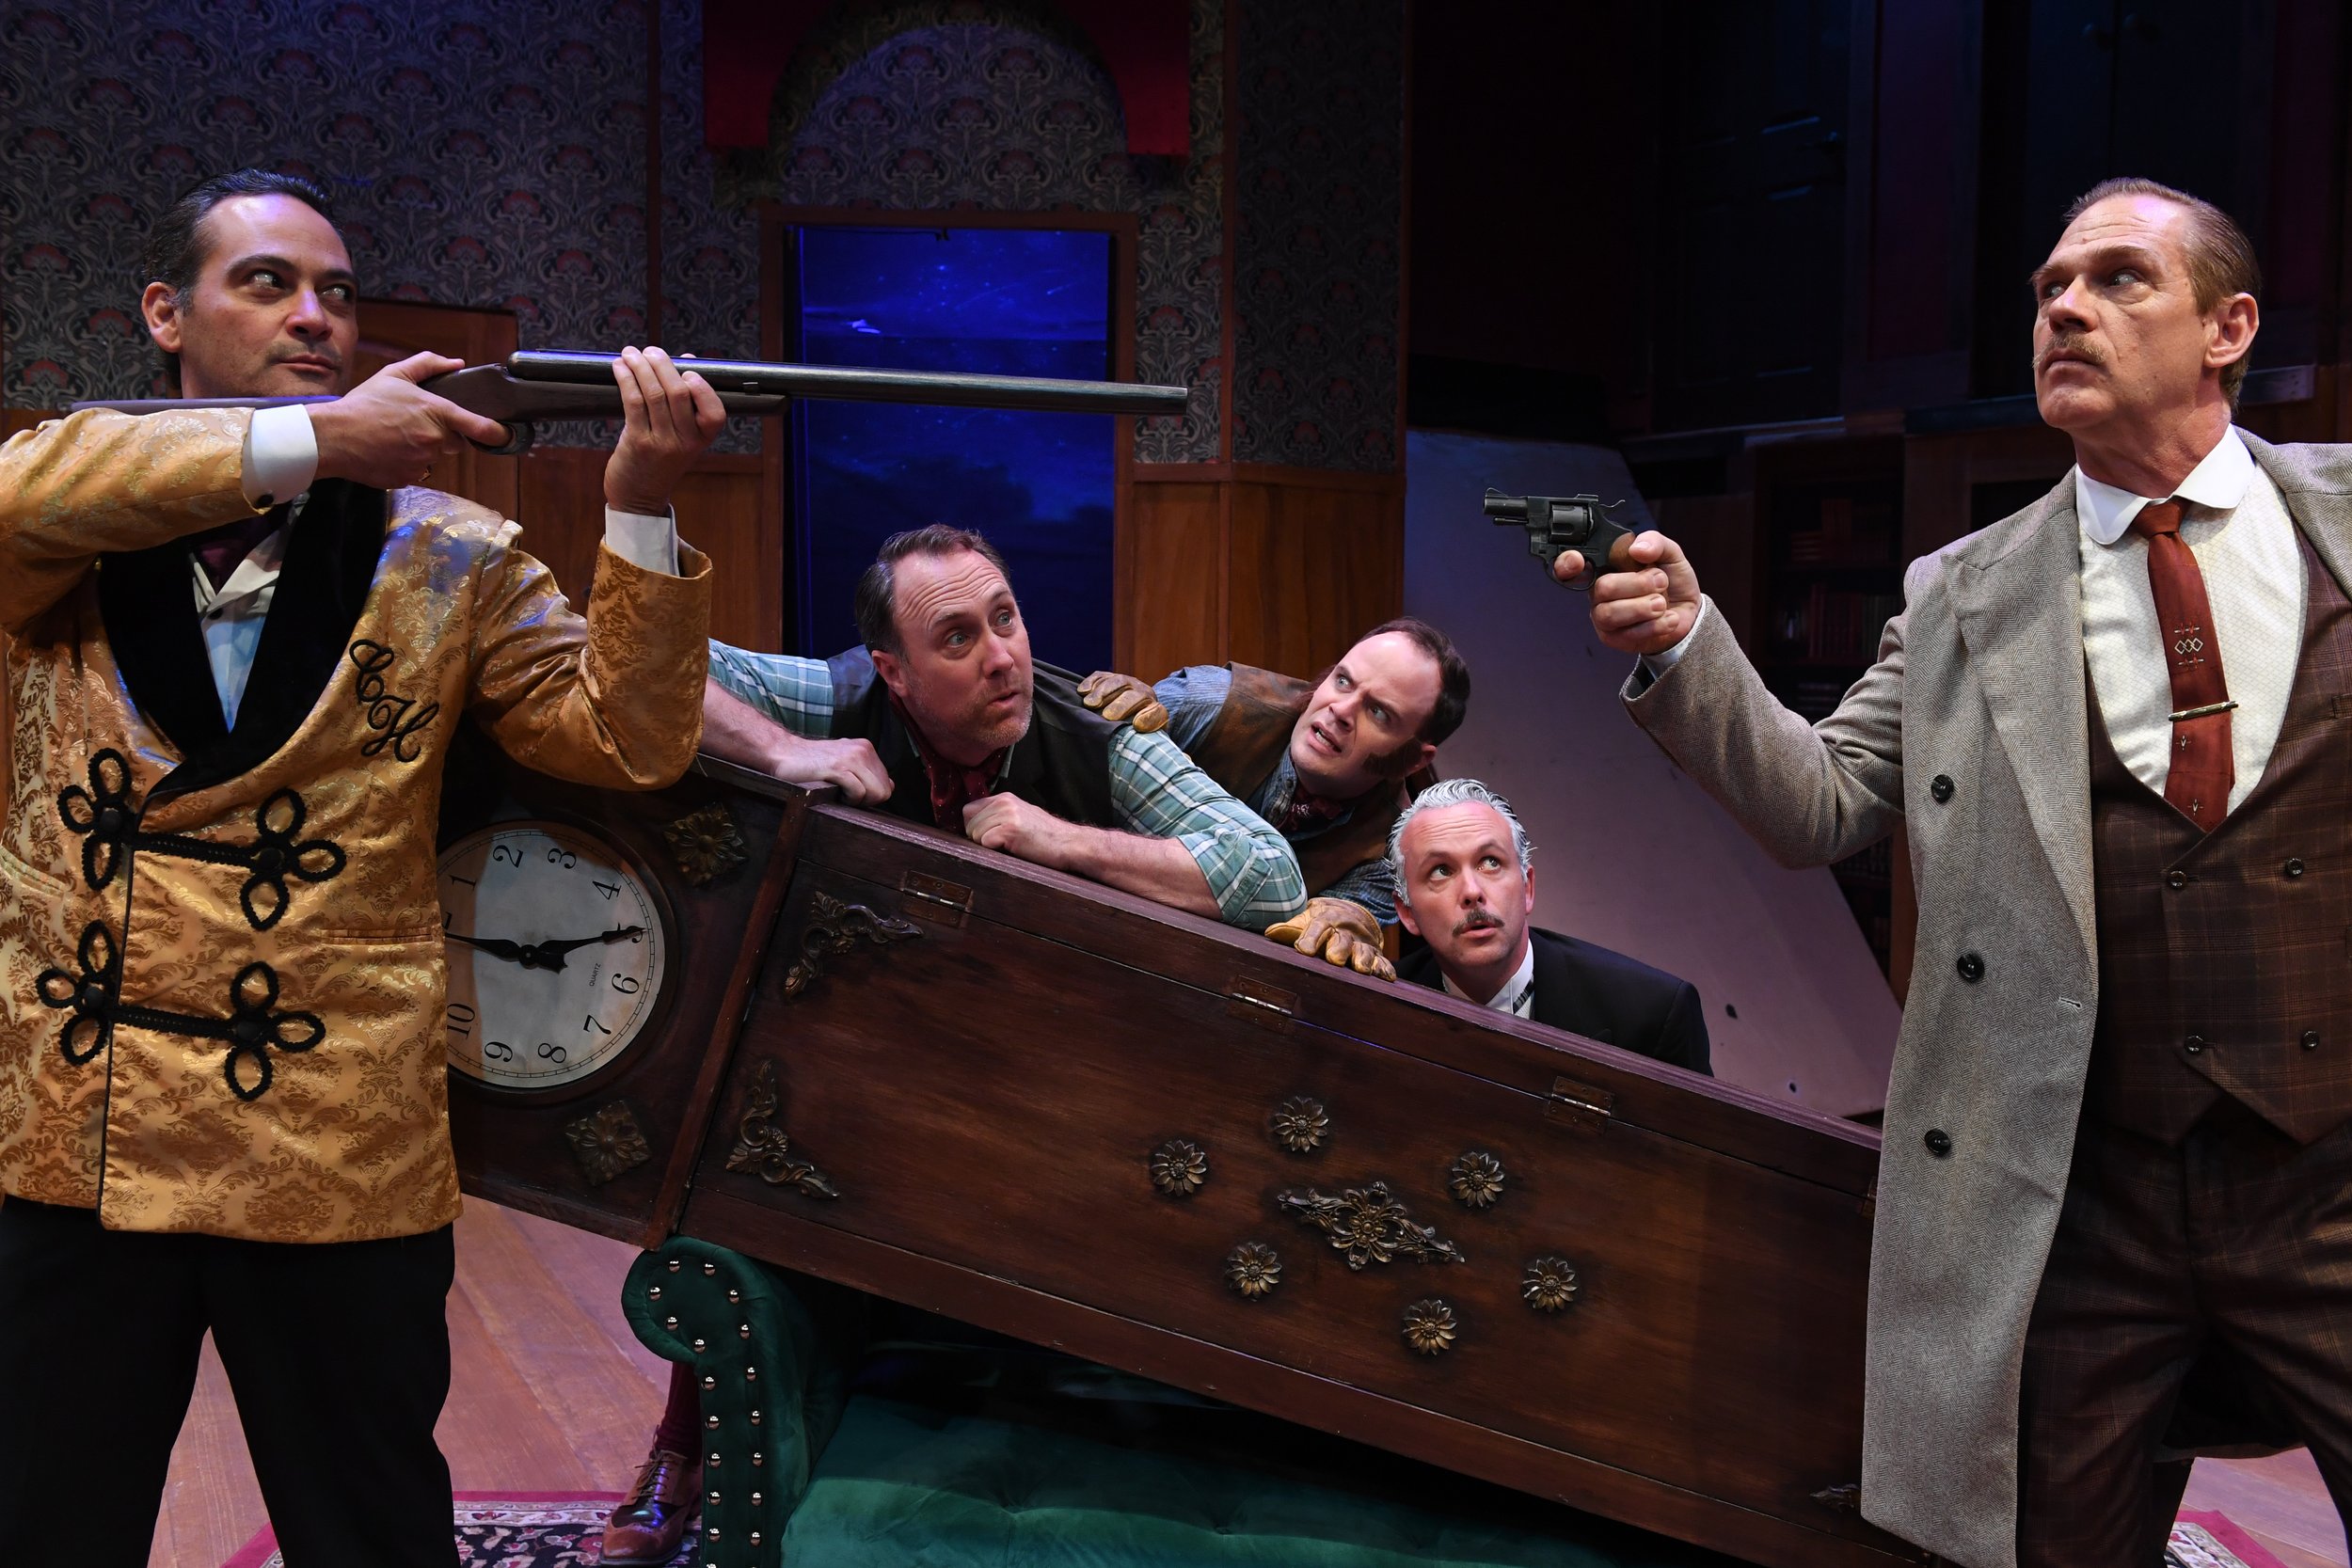    (left to right)&nbsp;JOHNNY MORENO*, WILL SPRINGHORN JR.*, KEITH PINTO*, and JONATHAN RHYS WILLIAMS      Credit: Dave Lepori      Photos for&nbsp;San Jose Stage Company’s production of THE PLAY THAT GOES&nbsp; WRONG by HENRY LEWIS, JONATHAN SAYER 